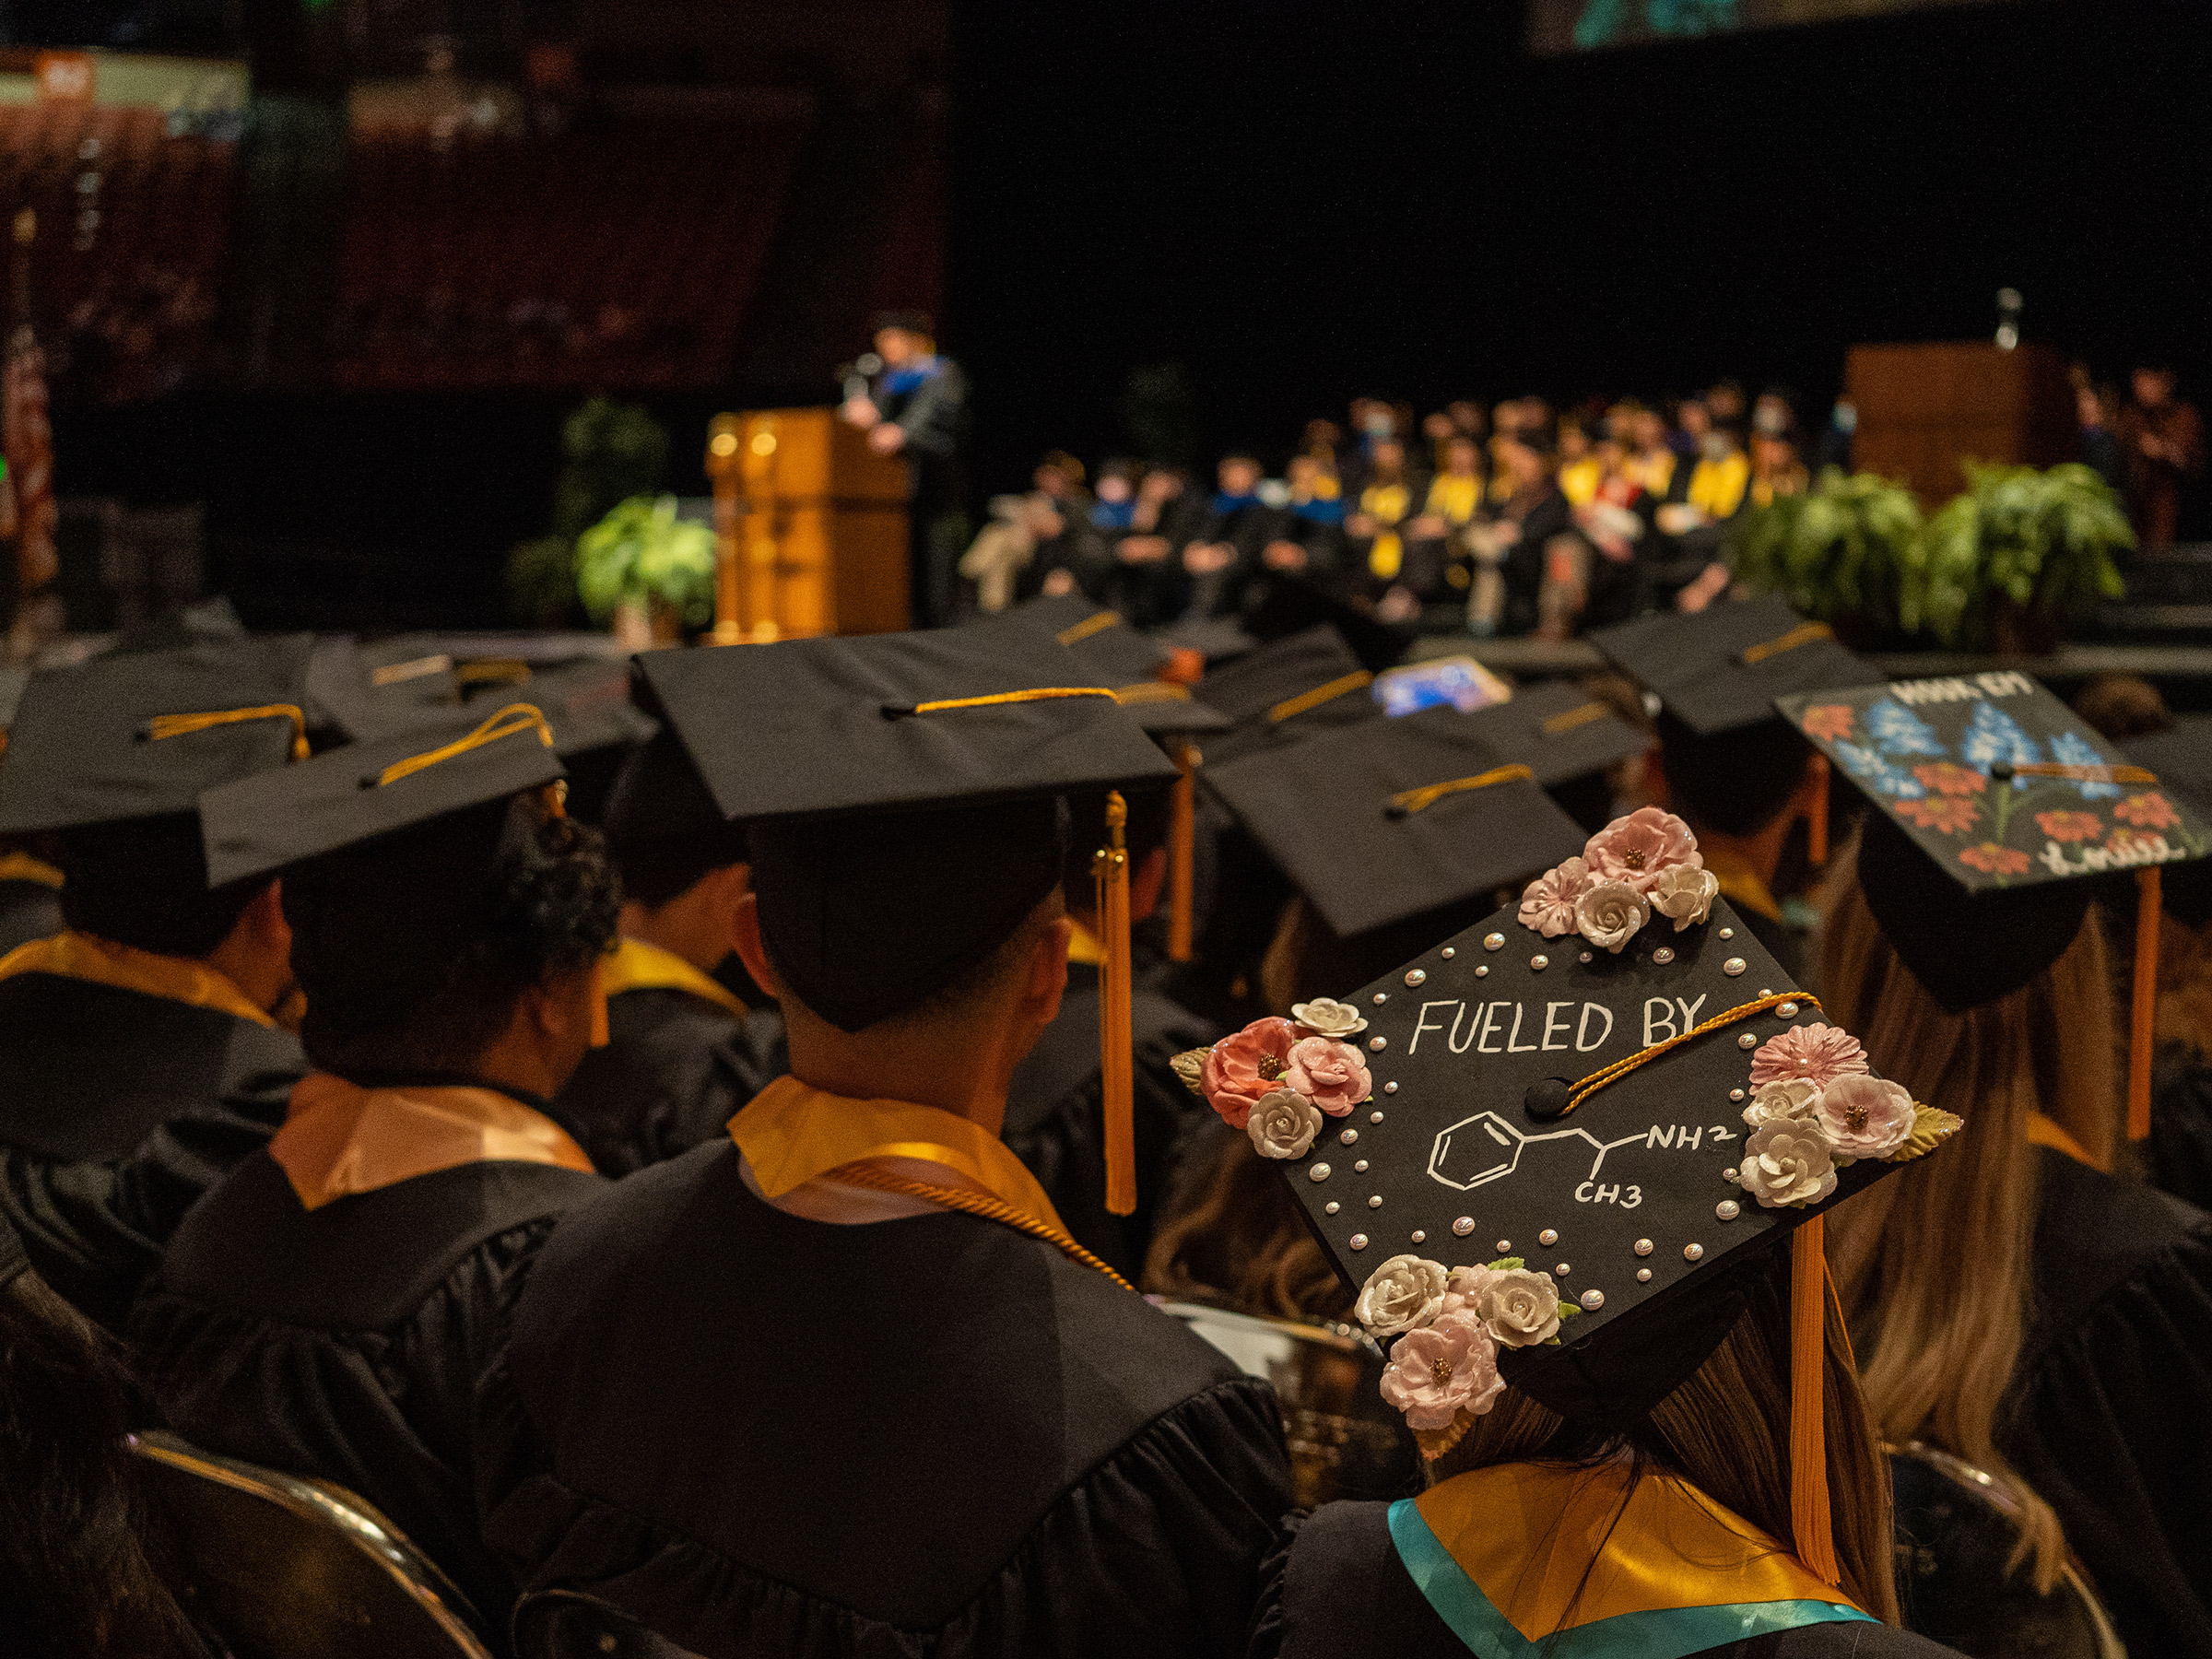 A photo of undergraduate students at commencement